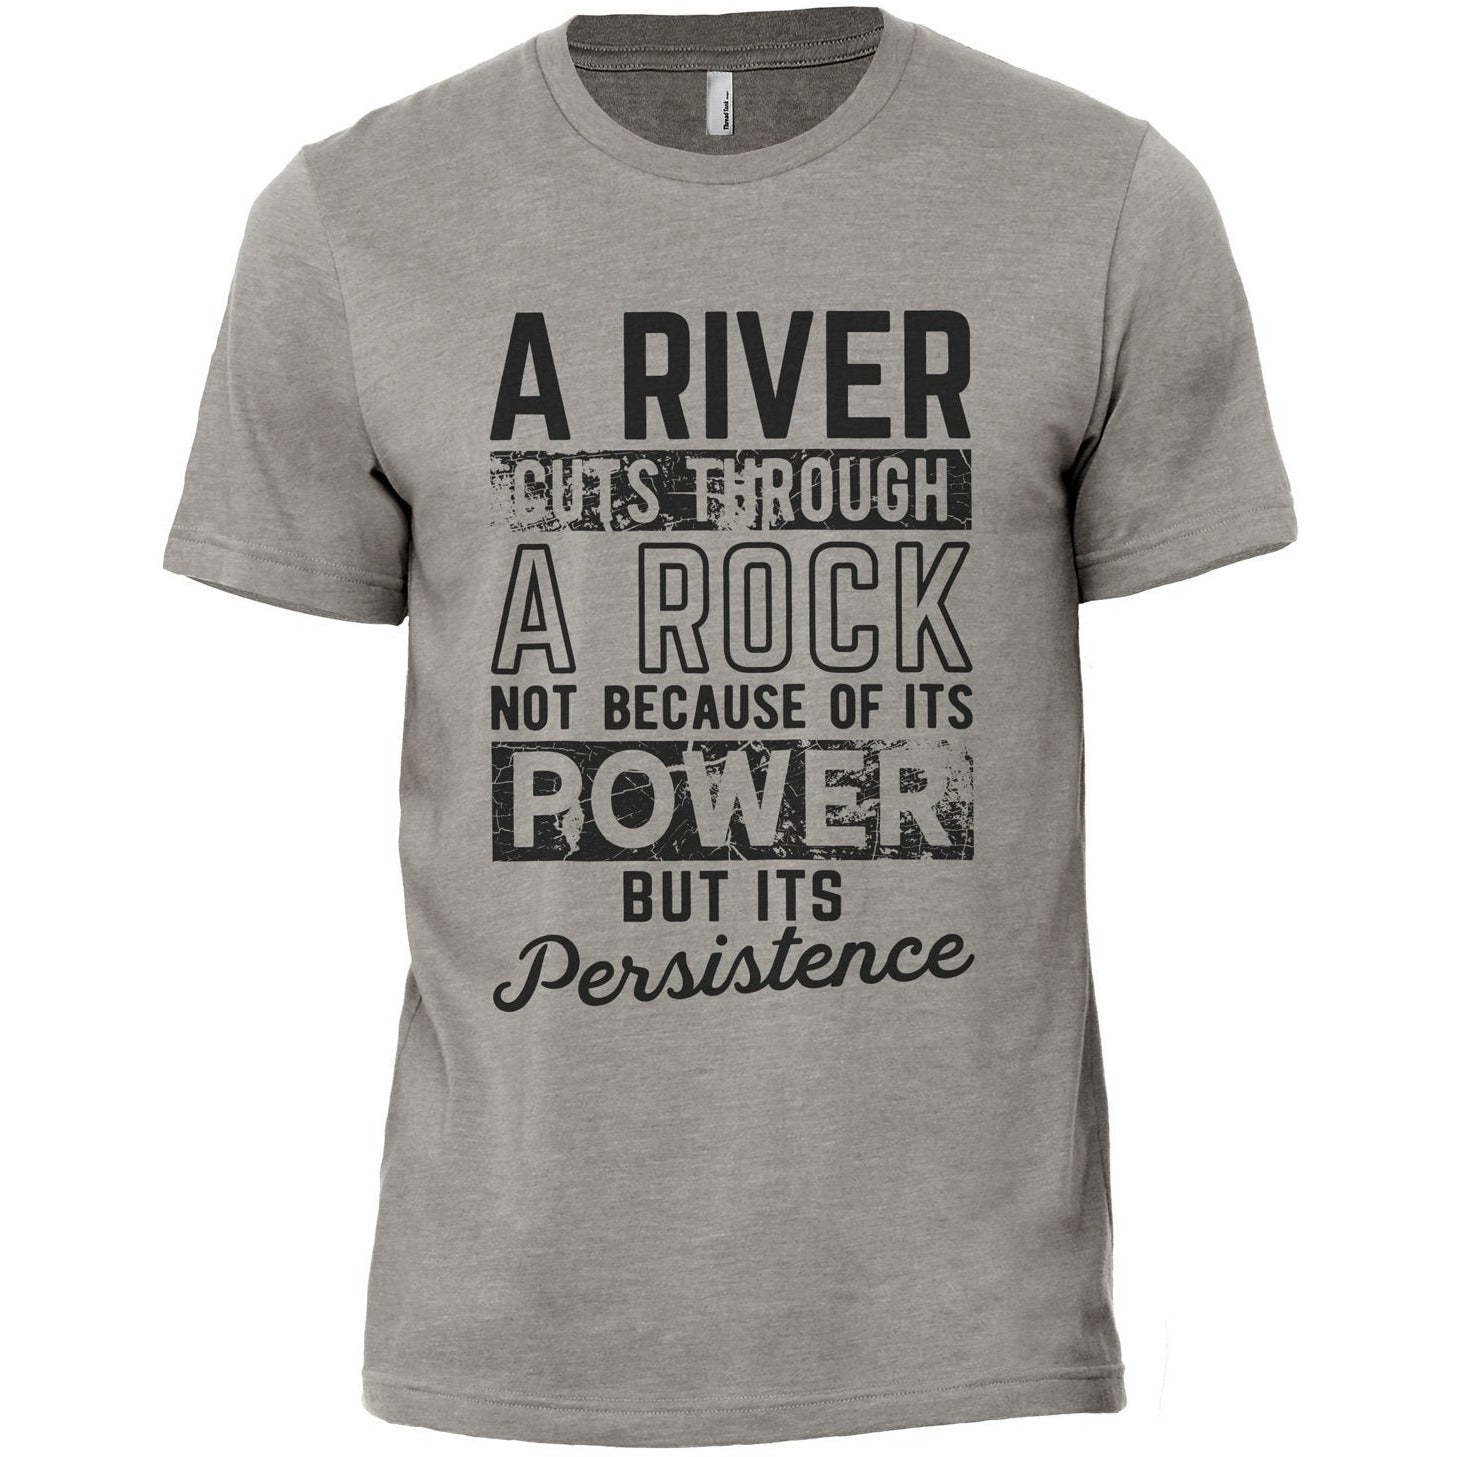 A River Cuts Through A Rock Not Because Of It's Power But It's Persistence Military Grey Printed Graphic Men's Crew T-Shirt Tee